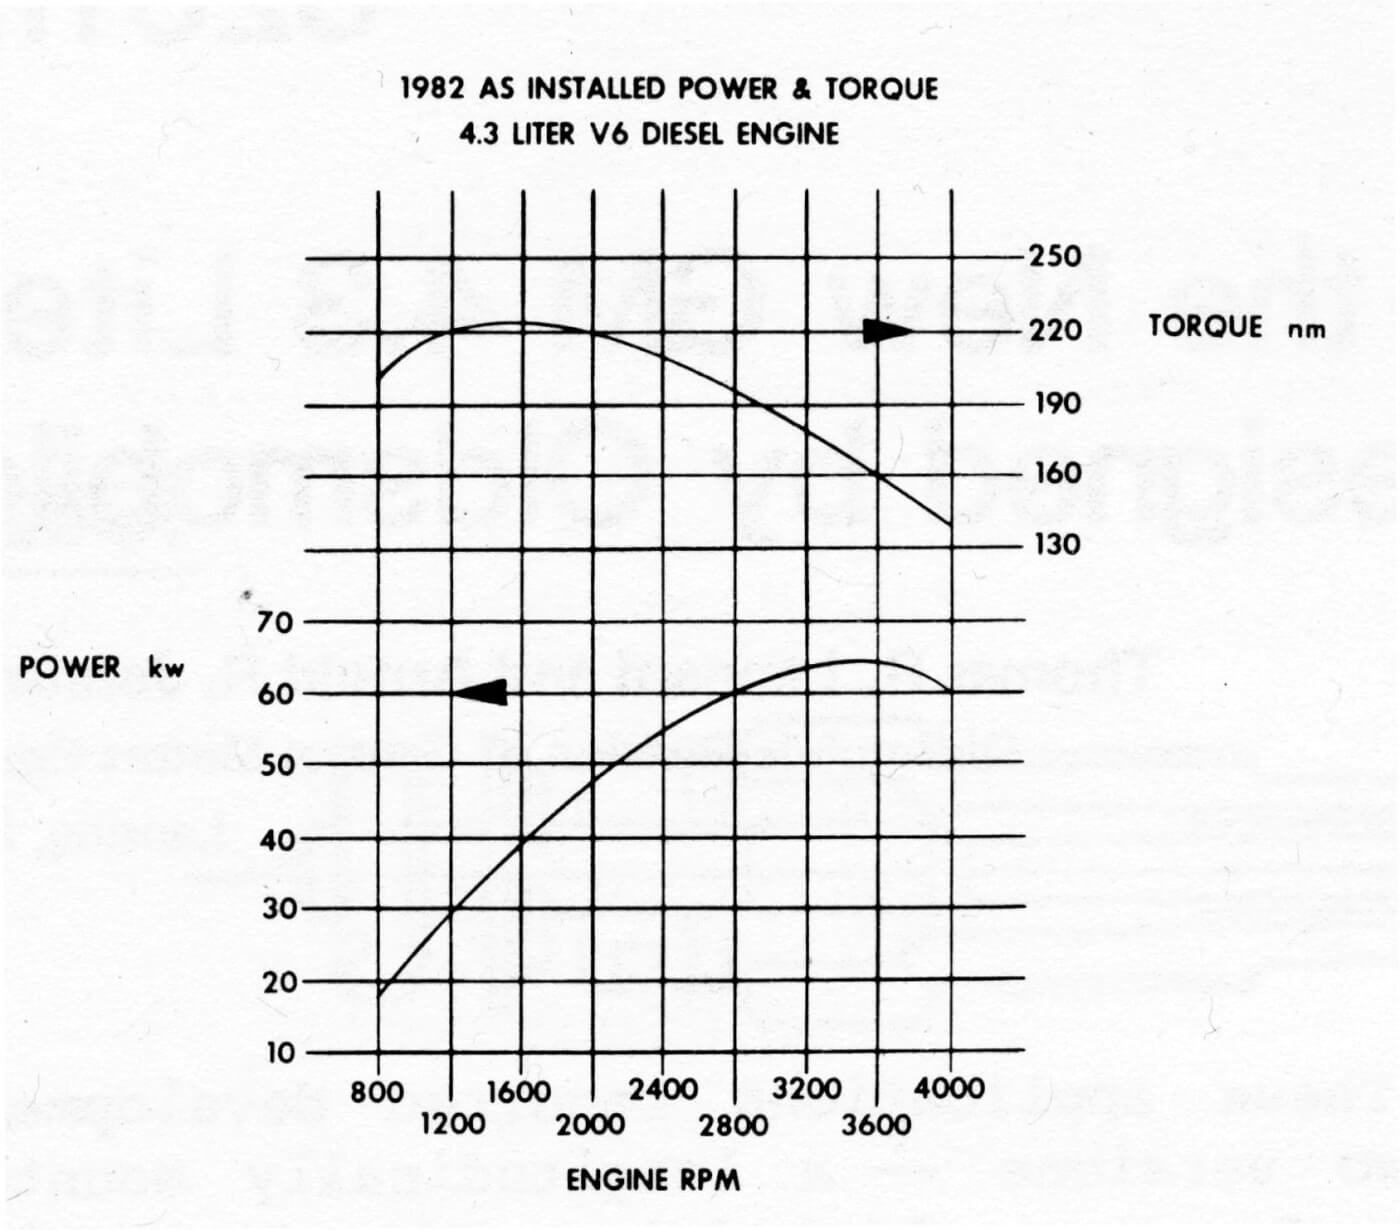 The Olds engineers thought they were metrically hip when they published a power and torque graph in kilowatts and Newton meters. We know the peaks were 85 hp and 165 lb-ft and we can still see the curves.